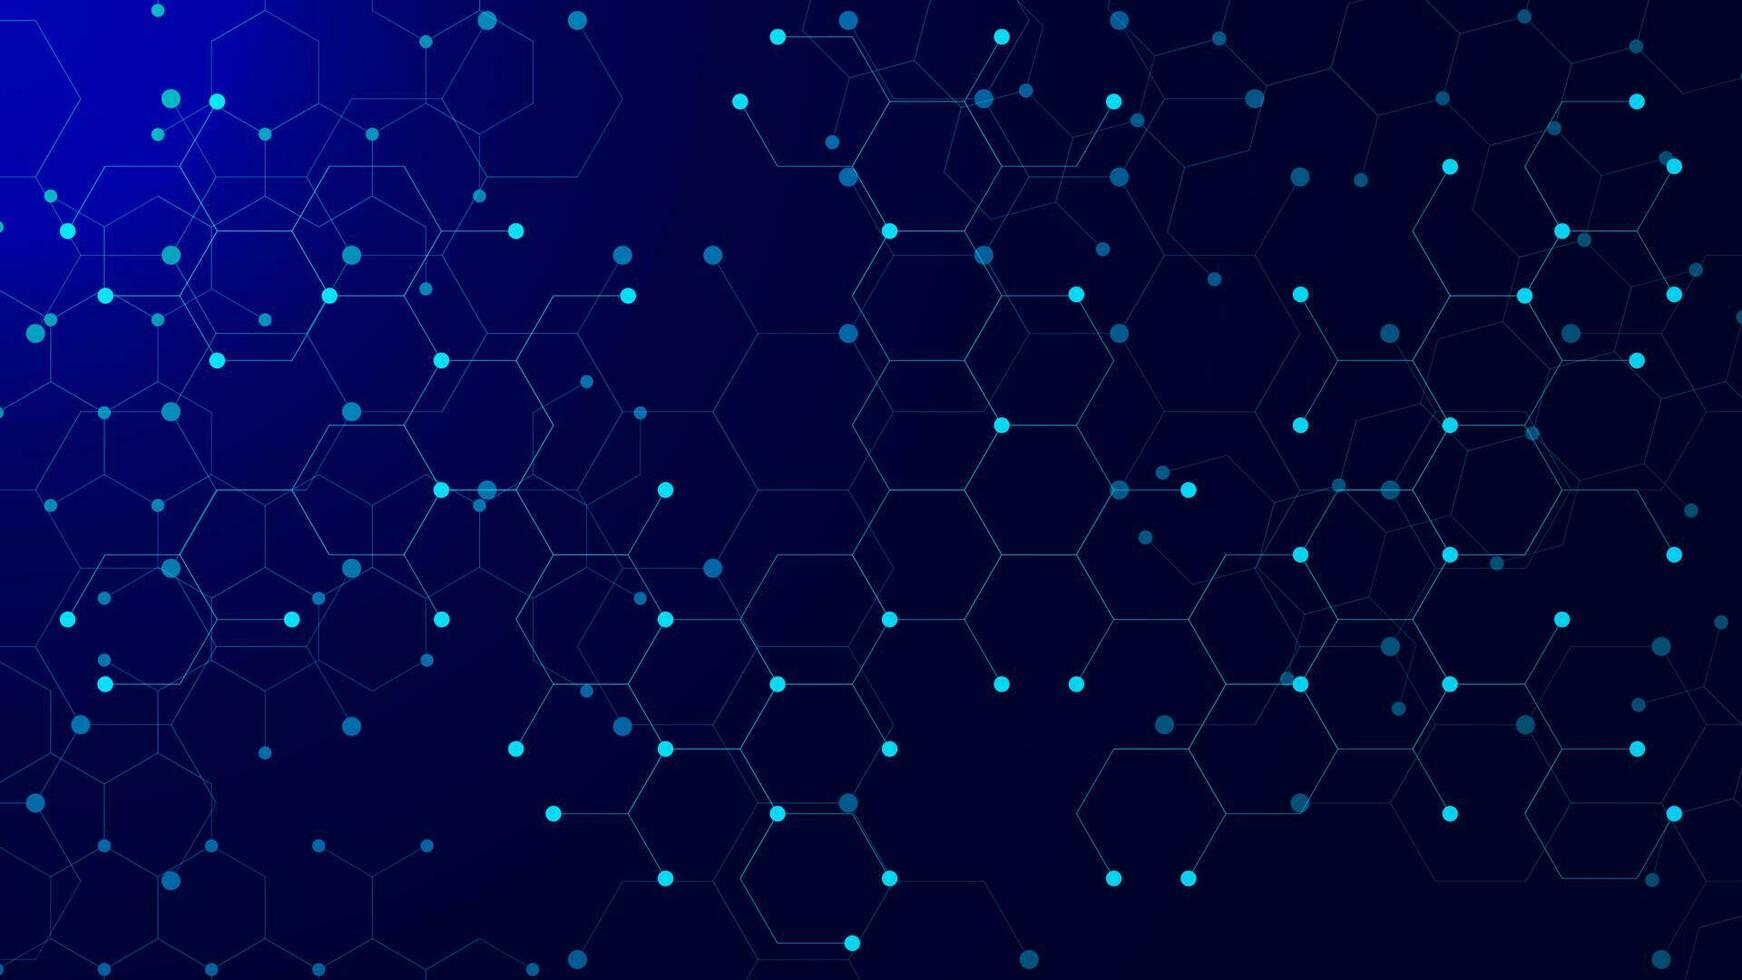 Hexagonal molecule with glowing particles for genetic and chemical compound system concept. Connected dots and lines. Science and technology background. Vector illustration.